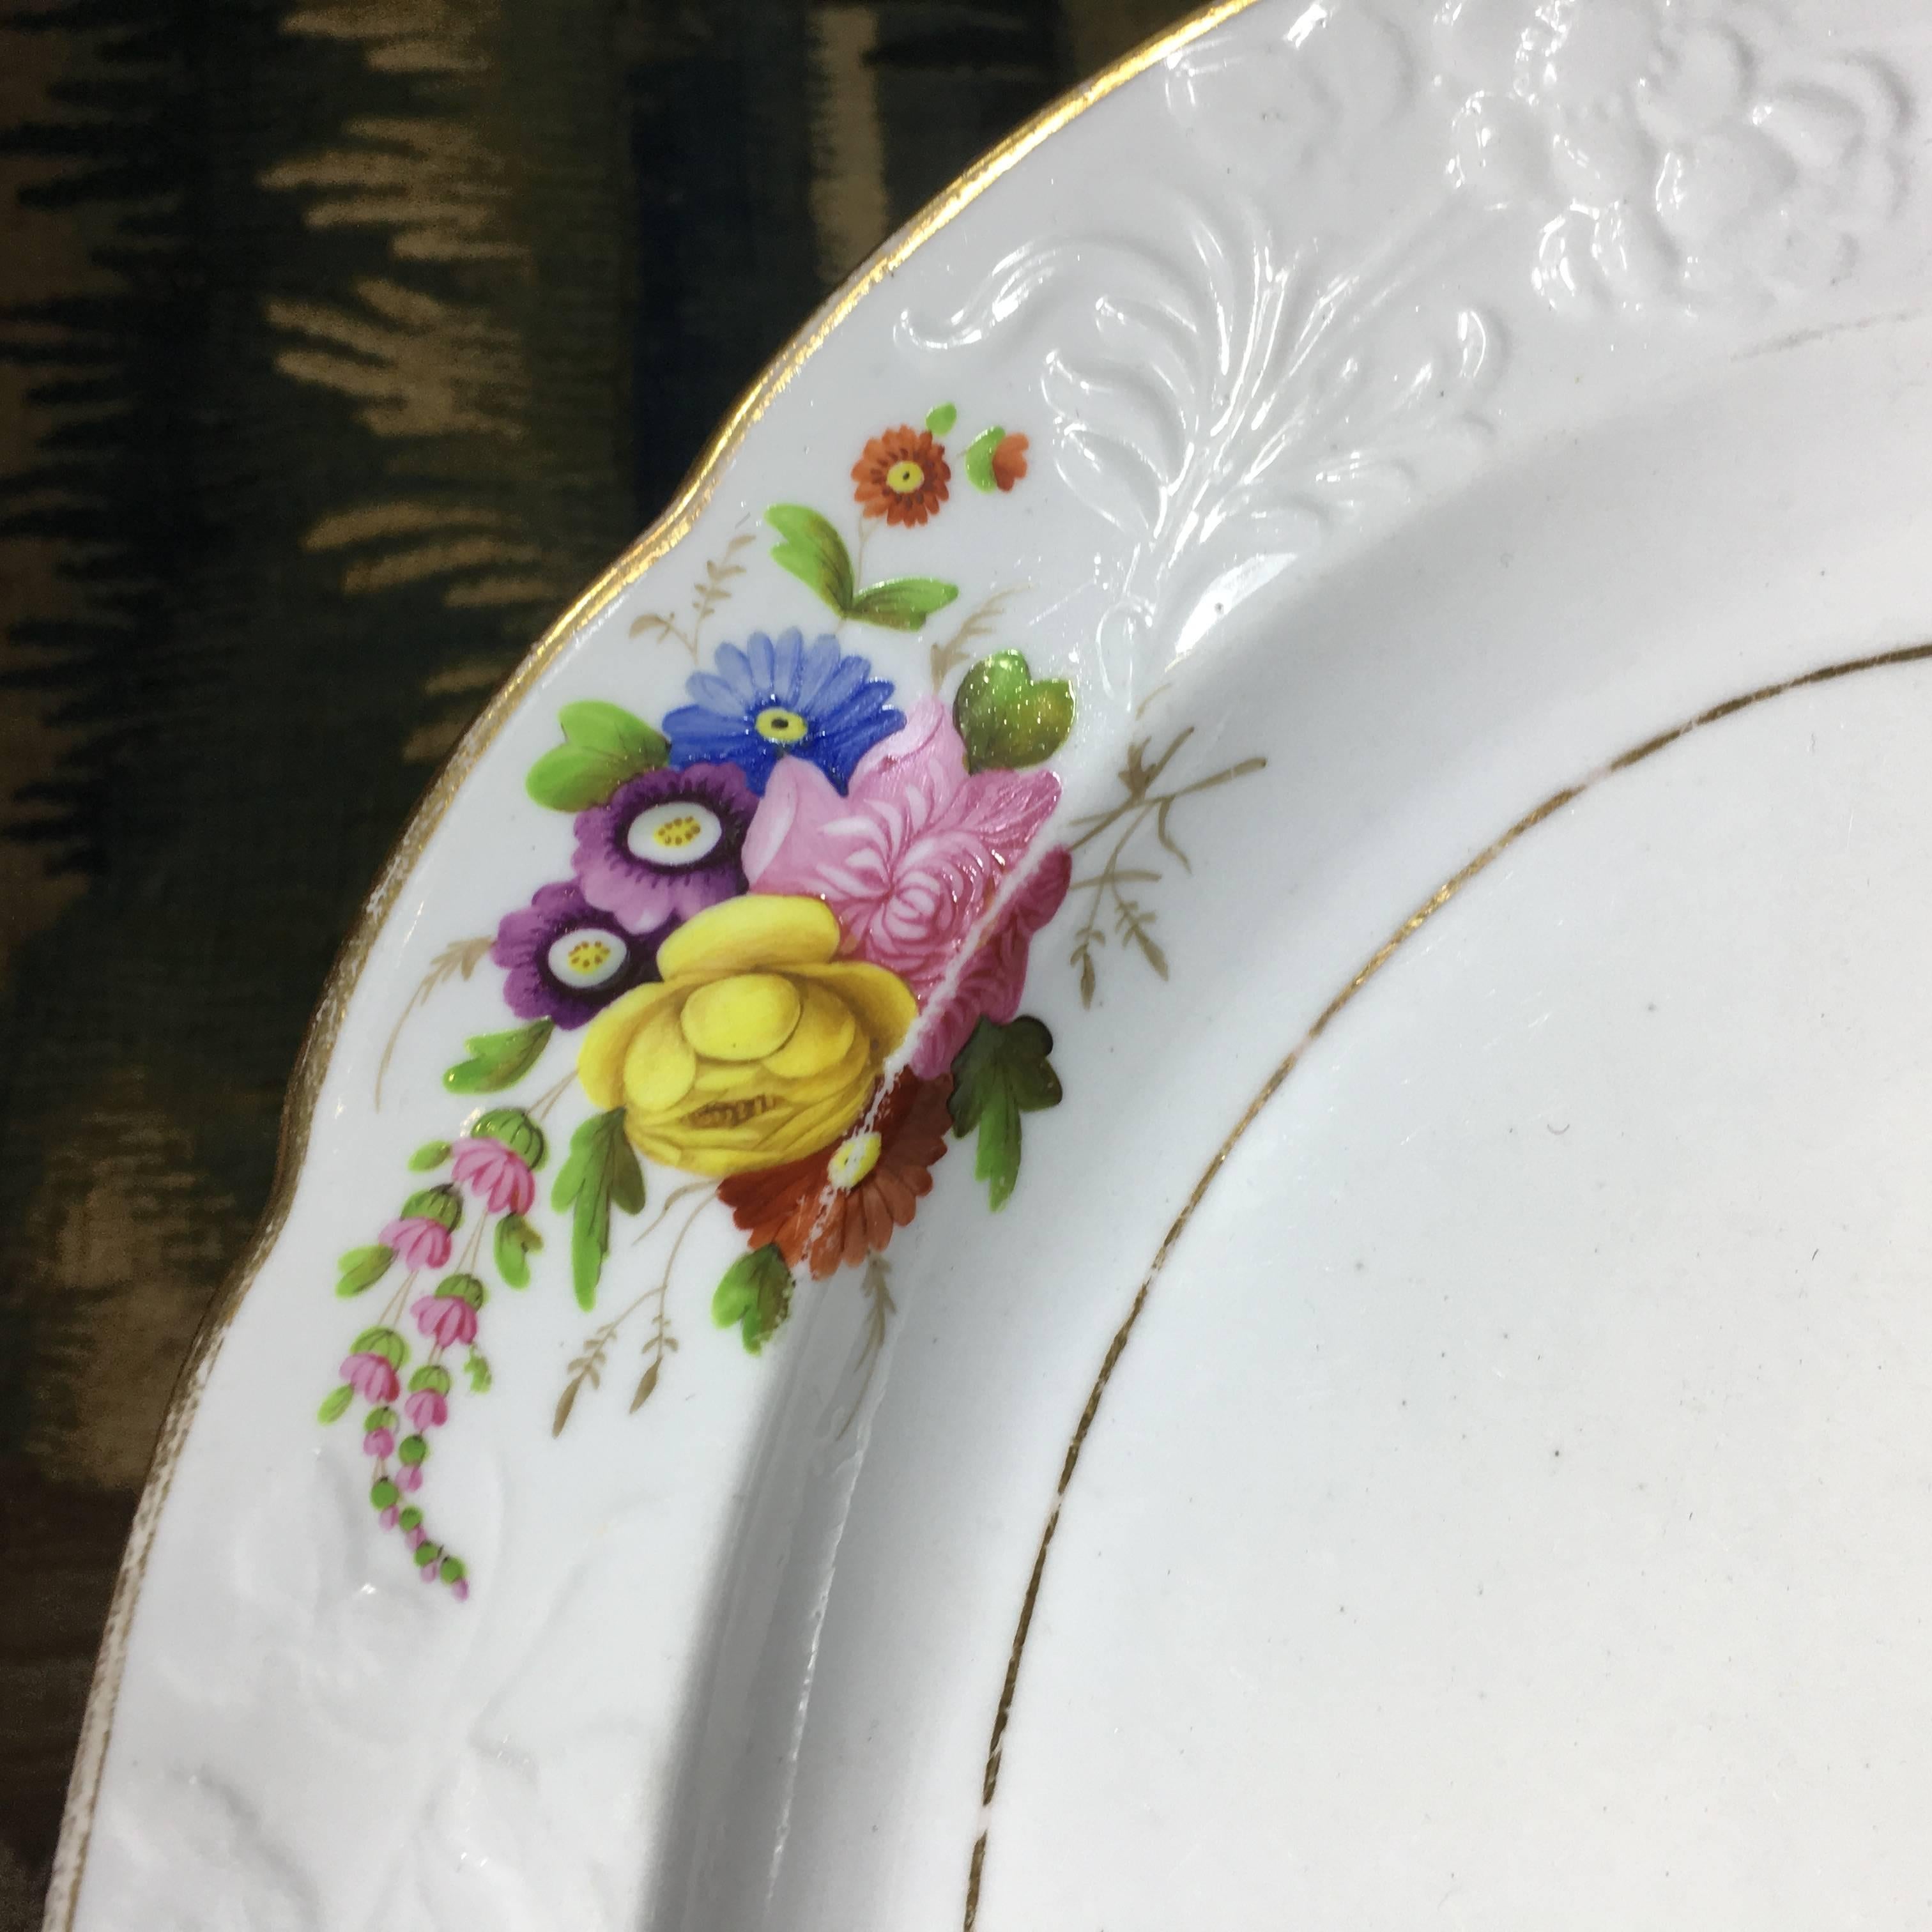 Superb Spode small oval platter with flower moulded border and finely painted flower groups probably by Daniel.
Pattern no 1943
Mark: Spode
circa 1815.